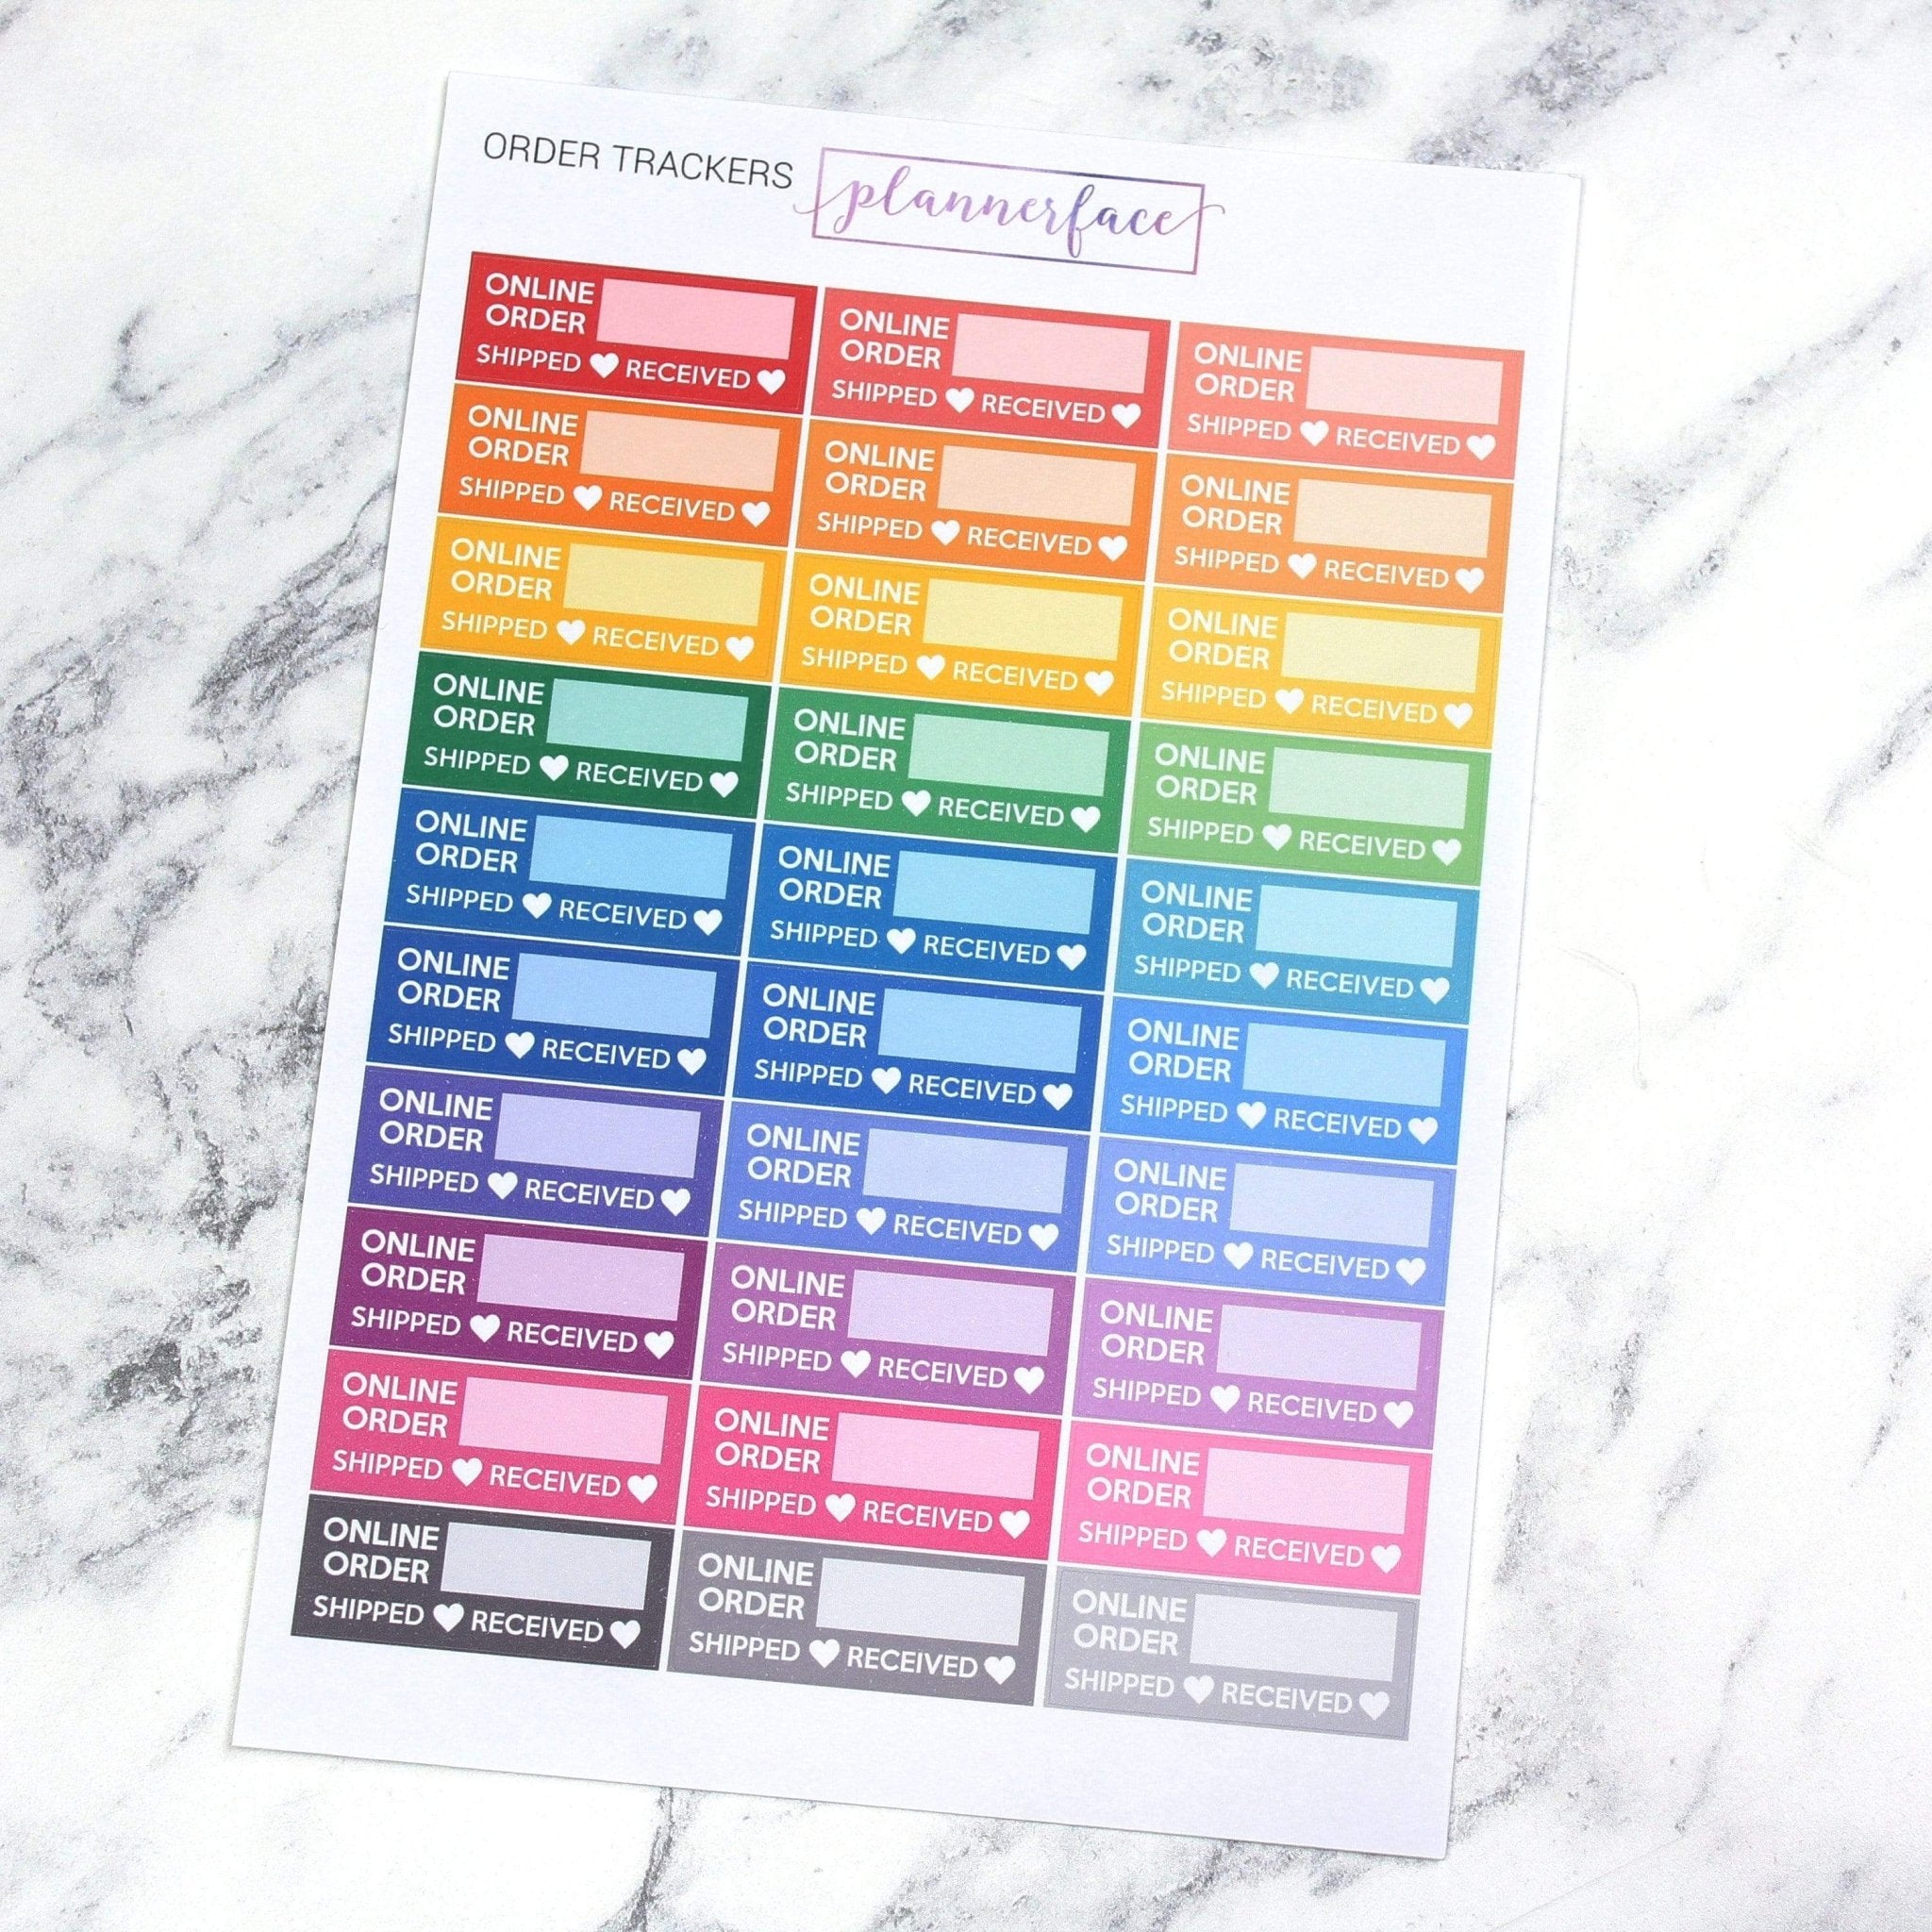 Order Trackers | Multicolour by Plannerface